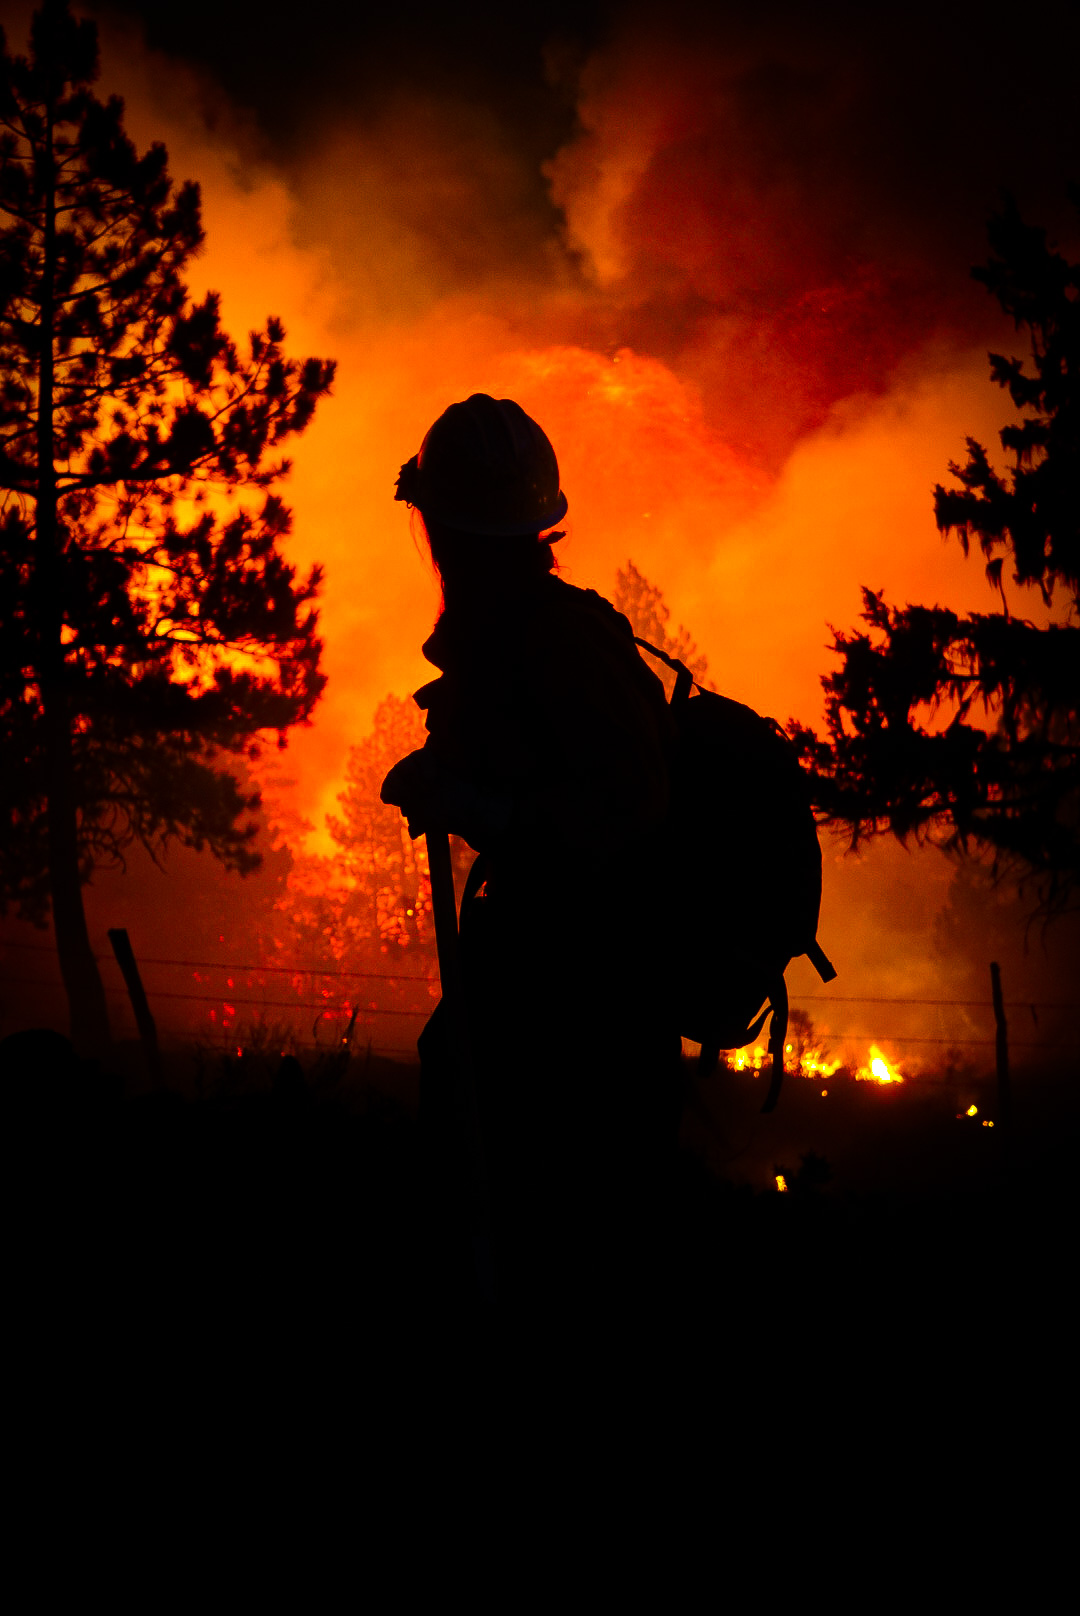 A Medford Crew 10 firefighter monitors a fire at night.